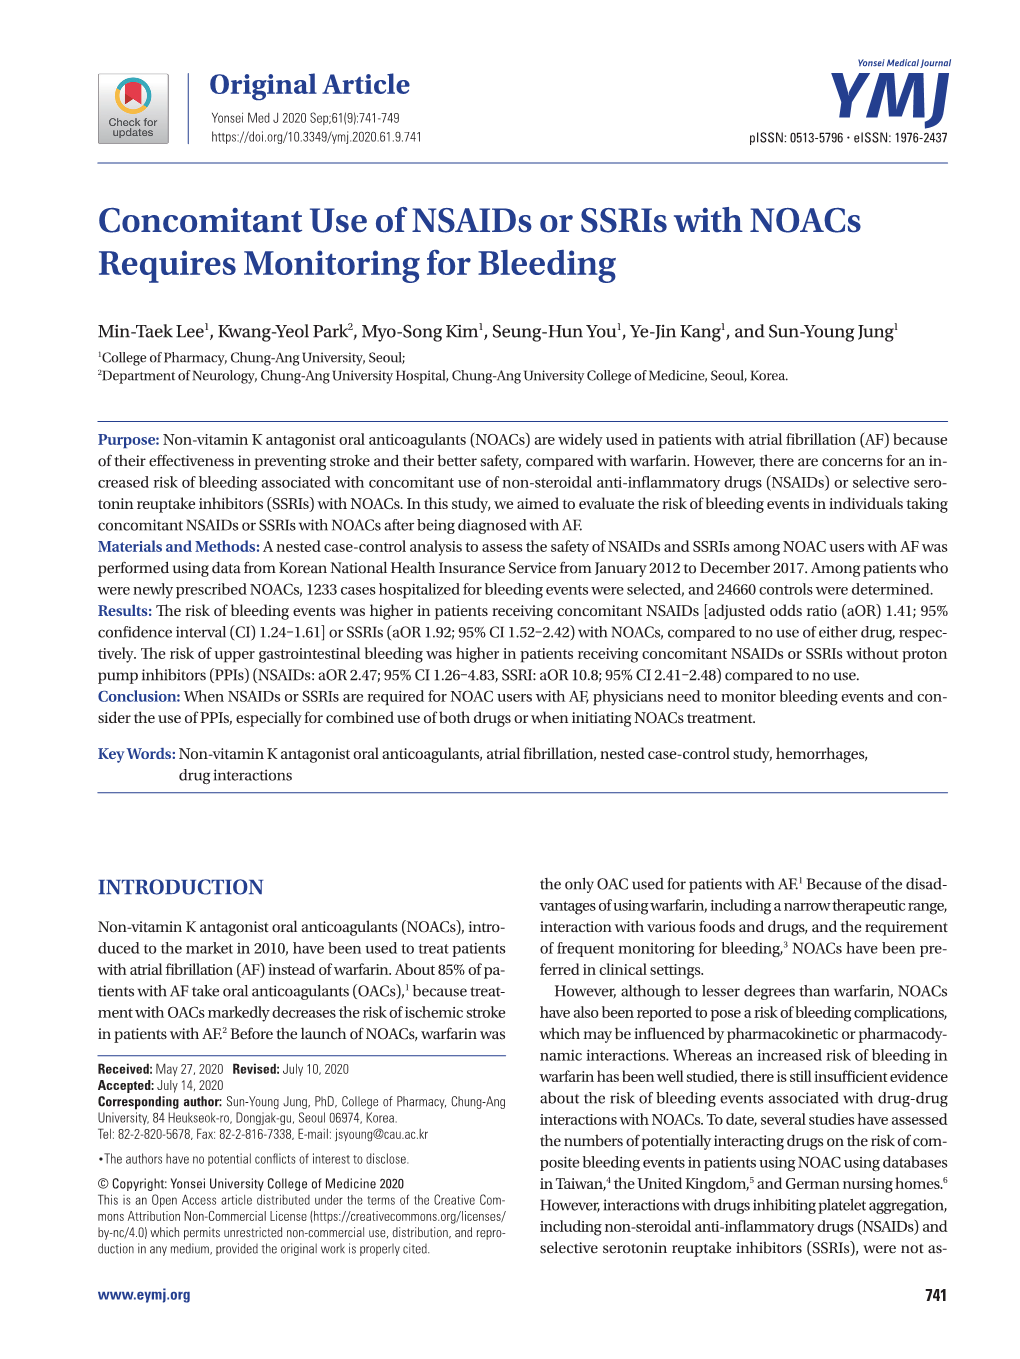 Concomitant Use of Nsaids Or Ssris with Noacs Requires Monitoring for Bleeding